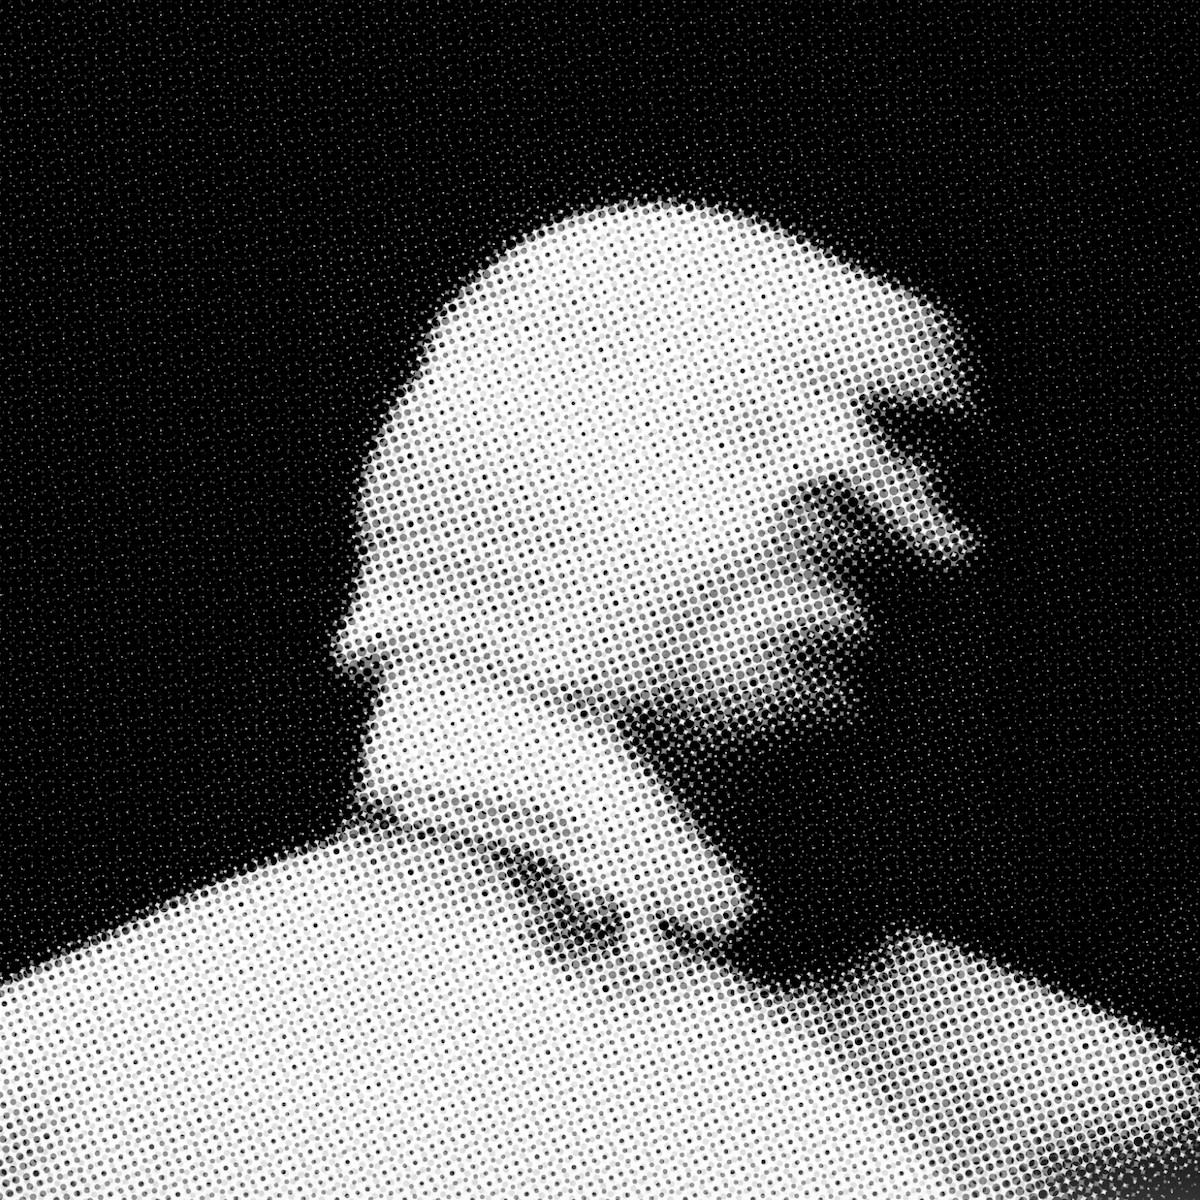 A black and white image of figure with a blurred face.